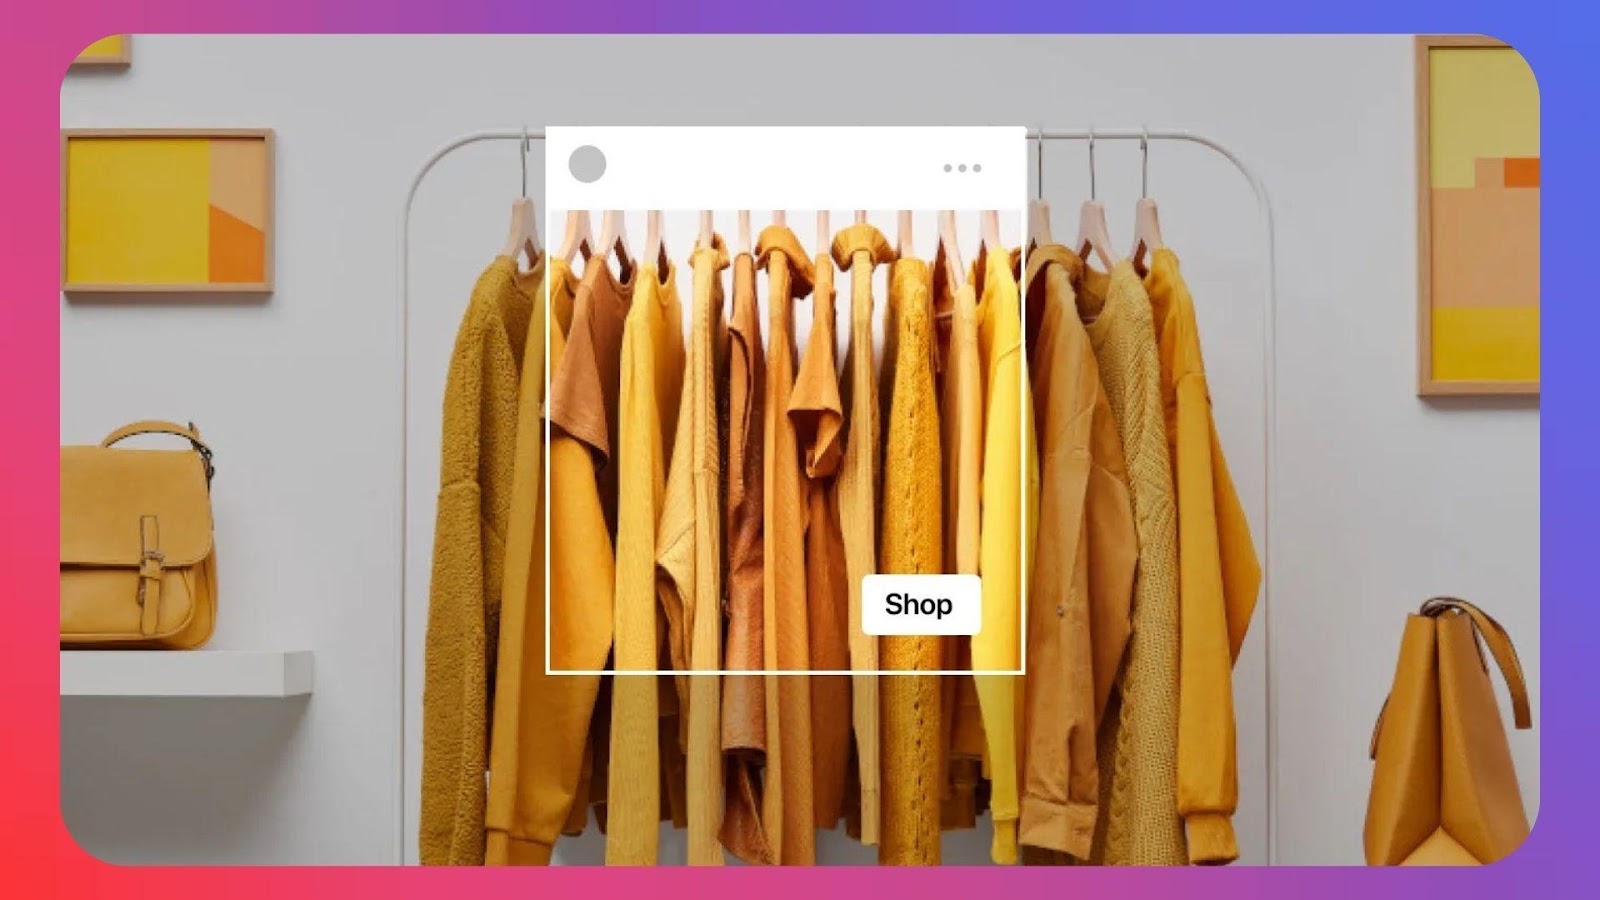 Image showing a clothing store behind an Instagram shopping post frame.